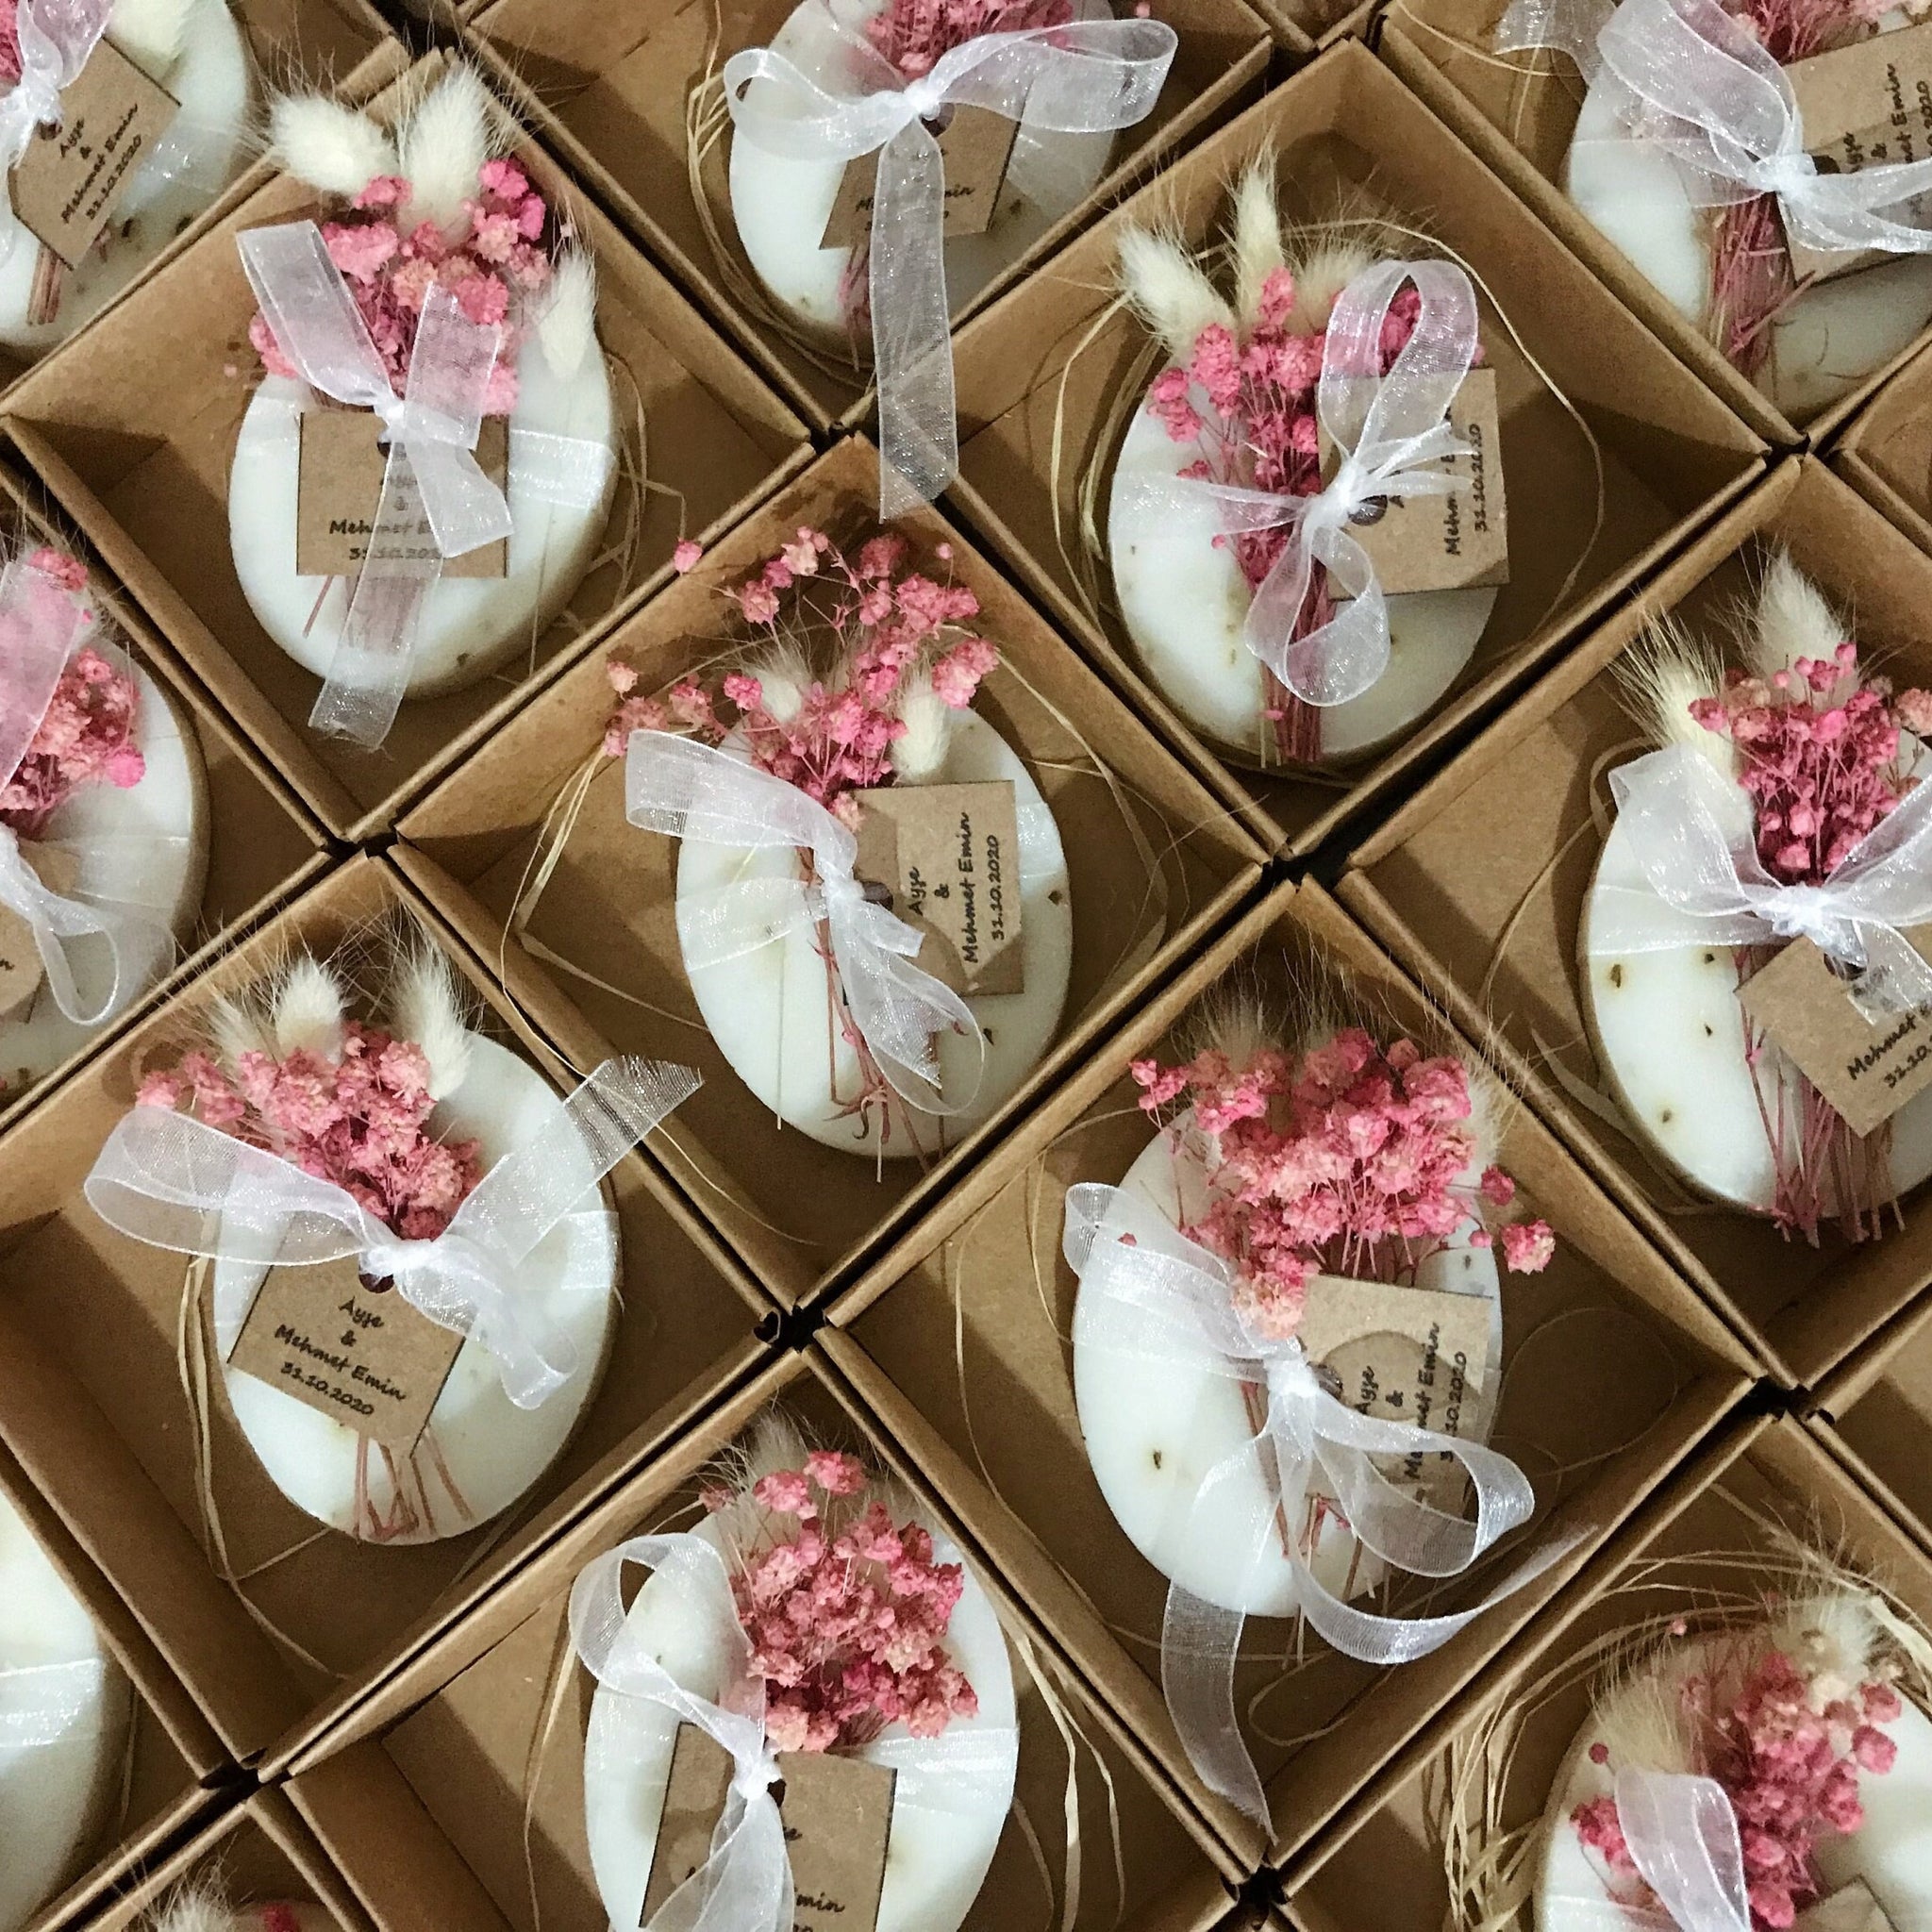 Wedding Party Gifts For Guests, Wedding Shower Soap Favors, Personalized Baby Shower Favors, Bulk Rustic Event Gifts, Mini Soap Favors